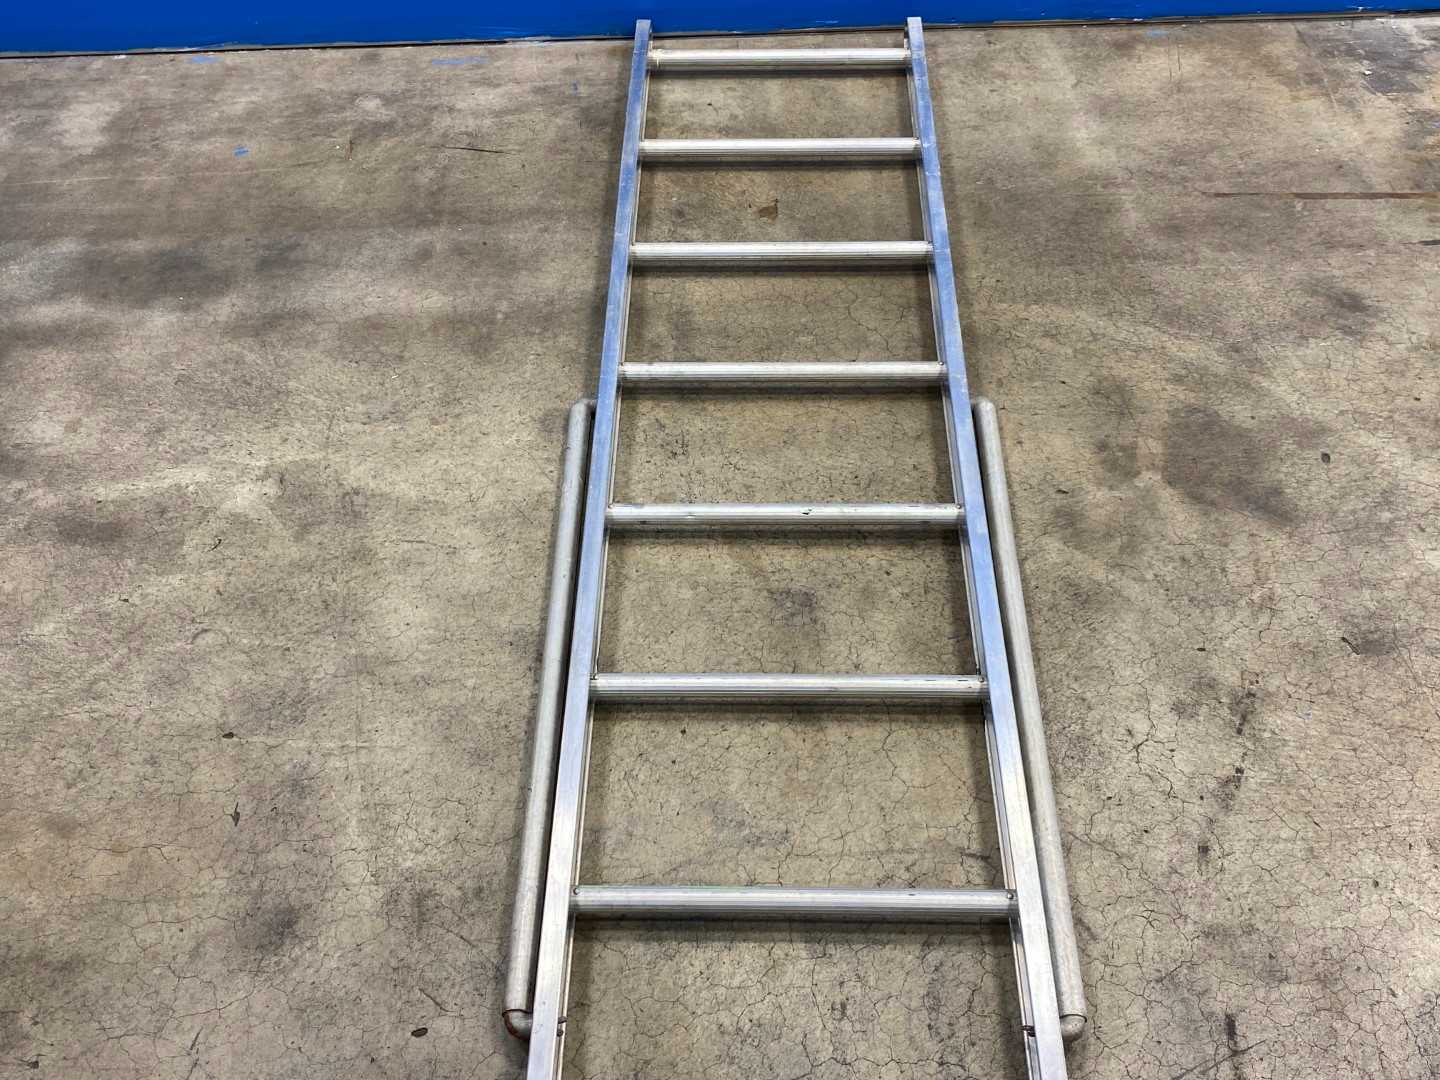 60Lx171Wx150H Louisville Scaffold Ladder and Scaffold Board 171Lx32Wx5H